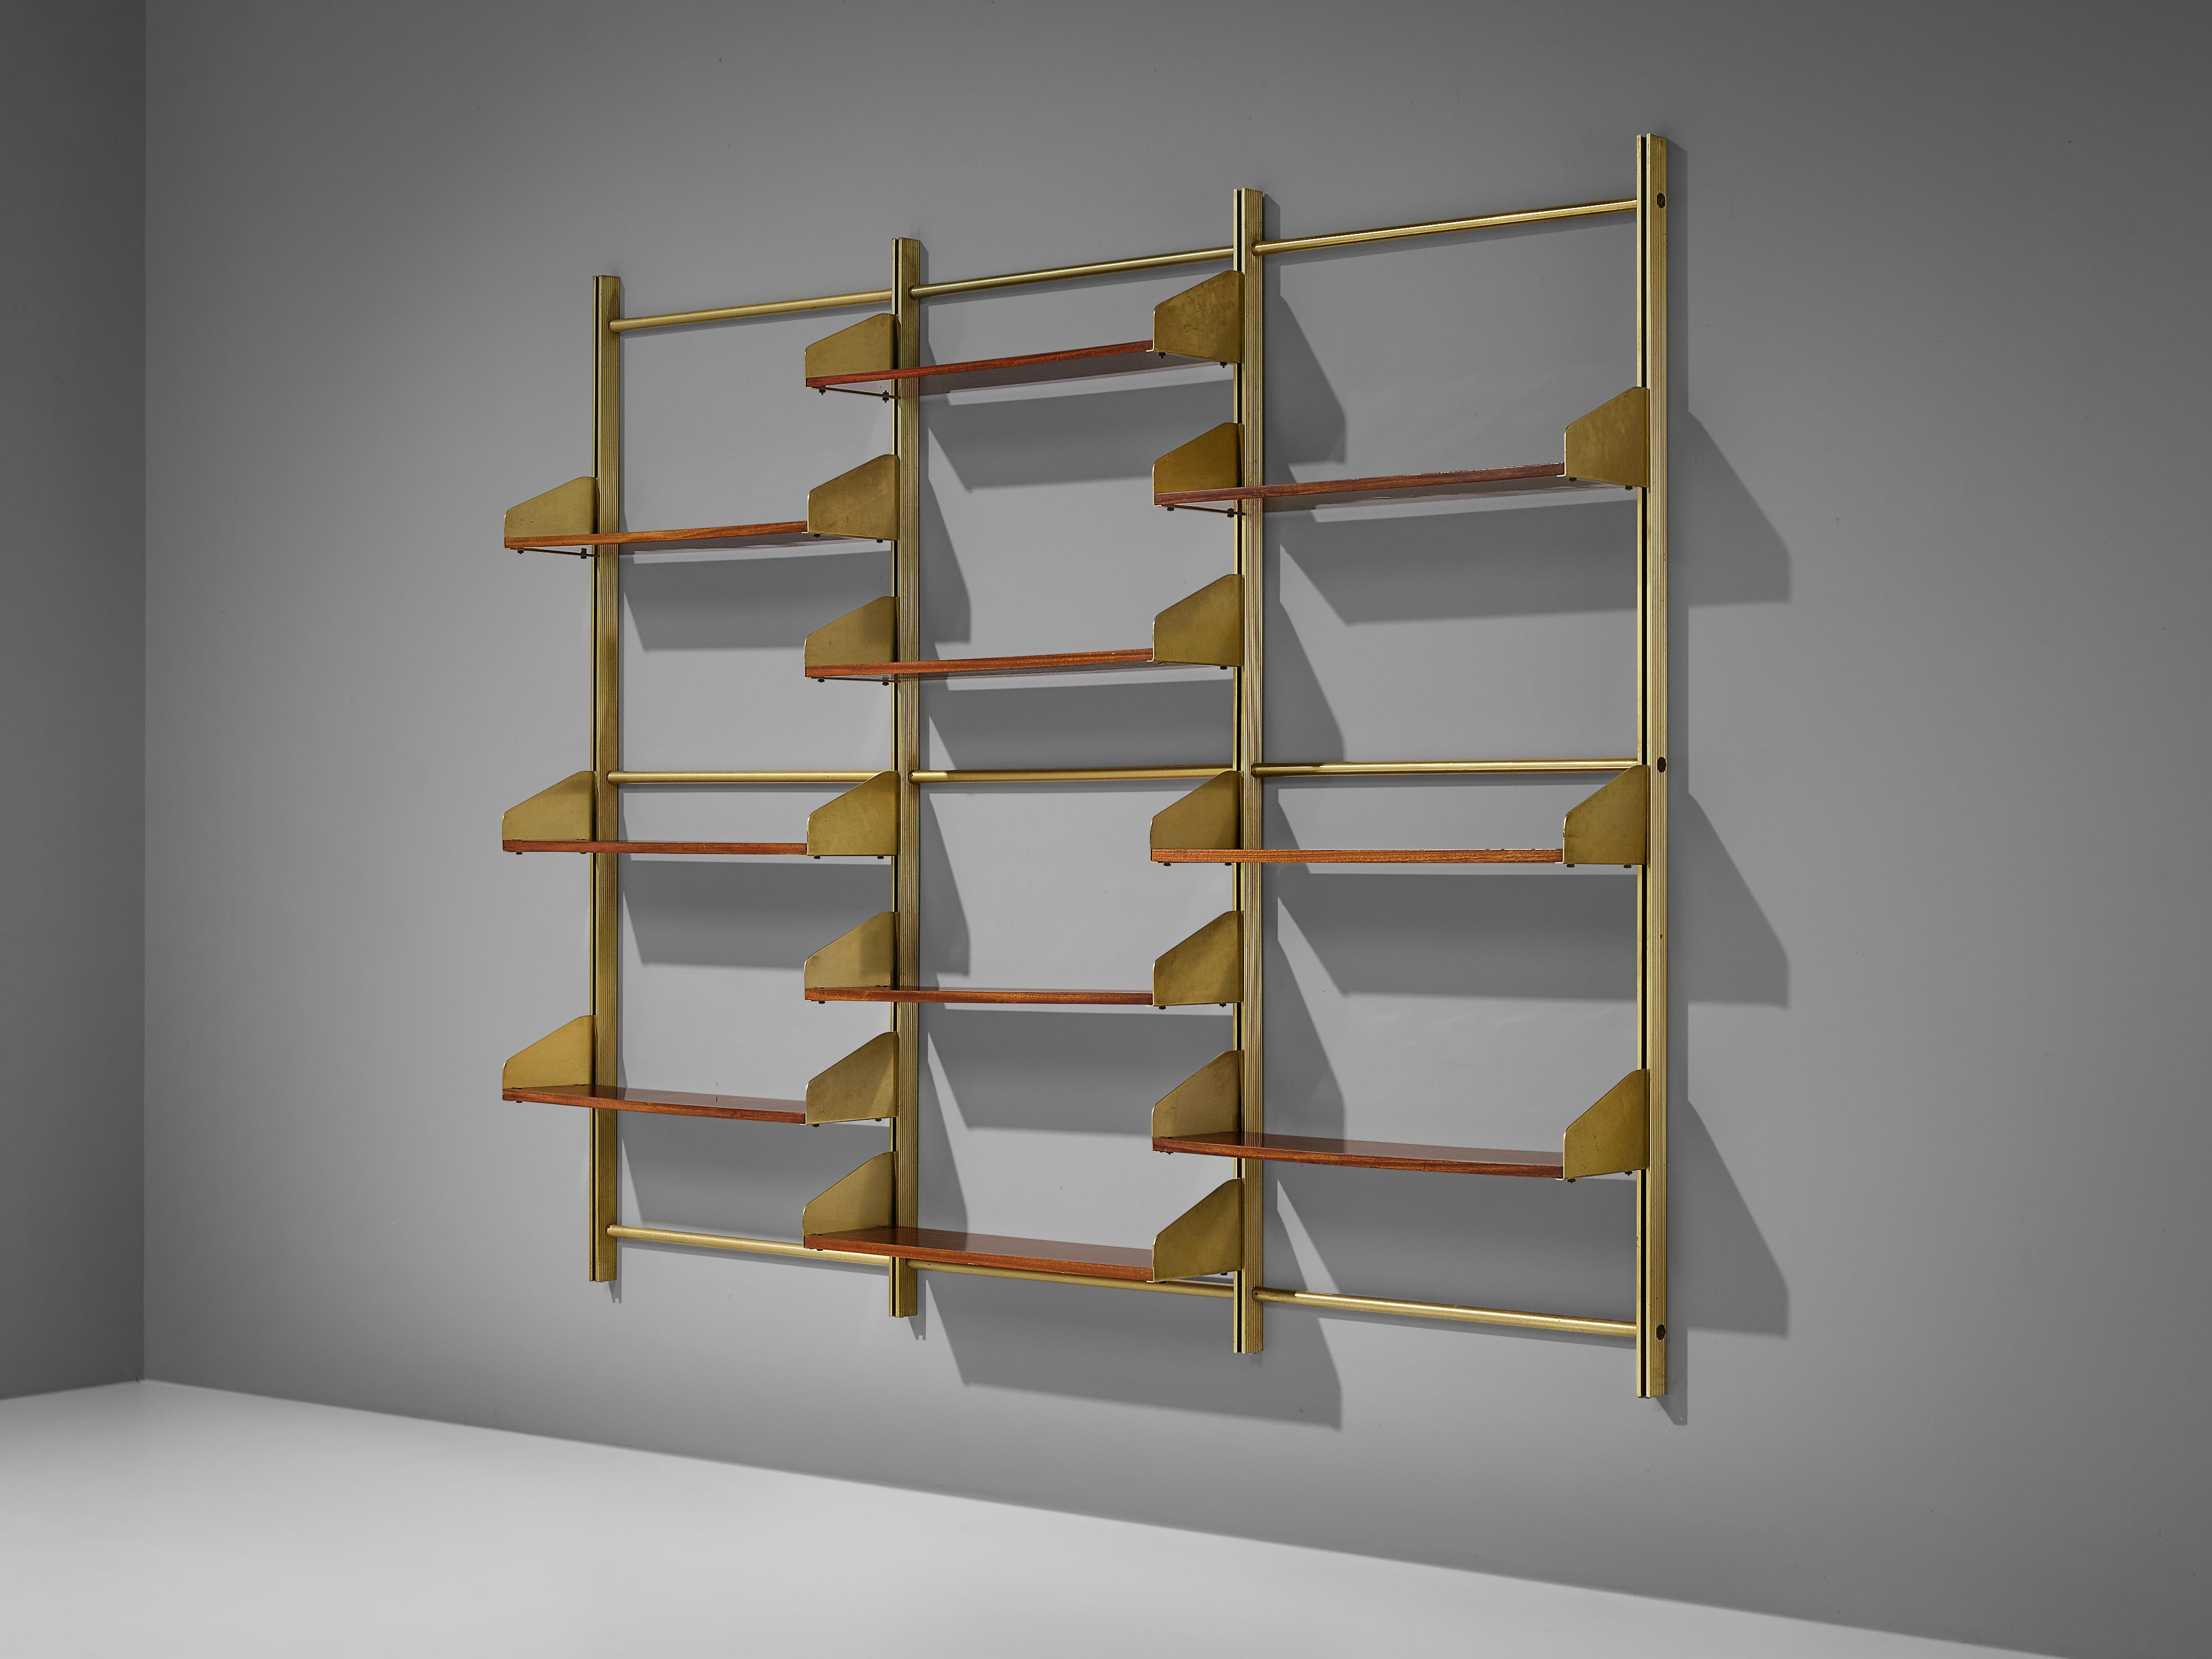 Feal, wall unit, teak, brass, aluminum, Italy, 1950s

This eloquent wall unit by Italian manufacturer Feal is made with a brassed aluminum frame, connective joints and plenty of teak shelves. Three columns structure the shelf vertically. The